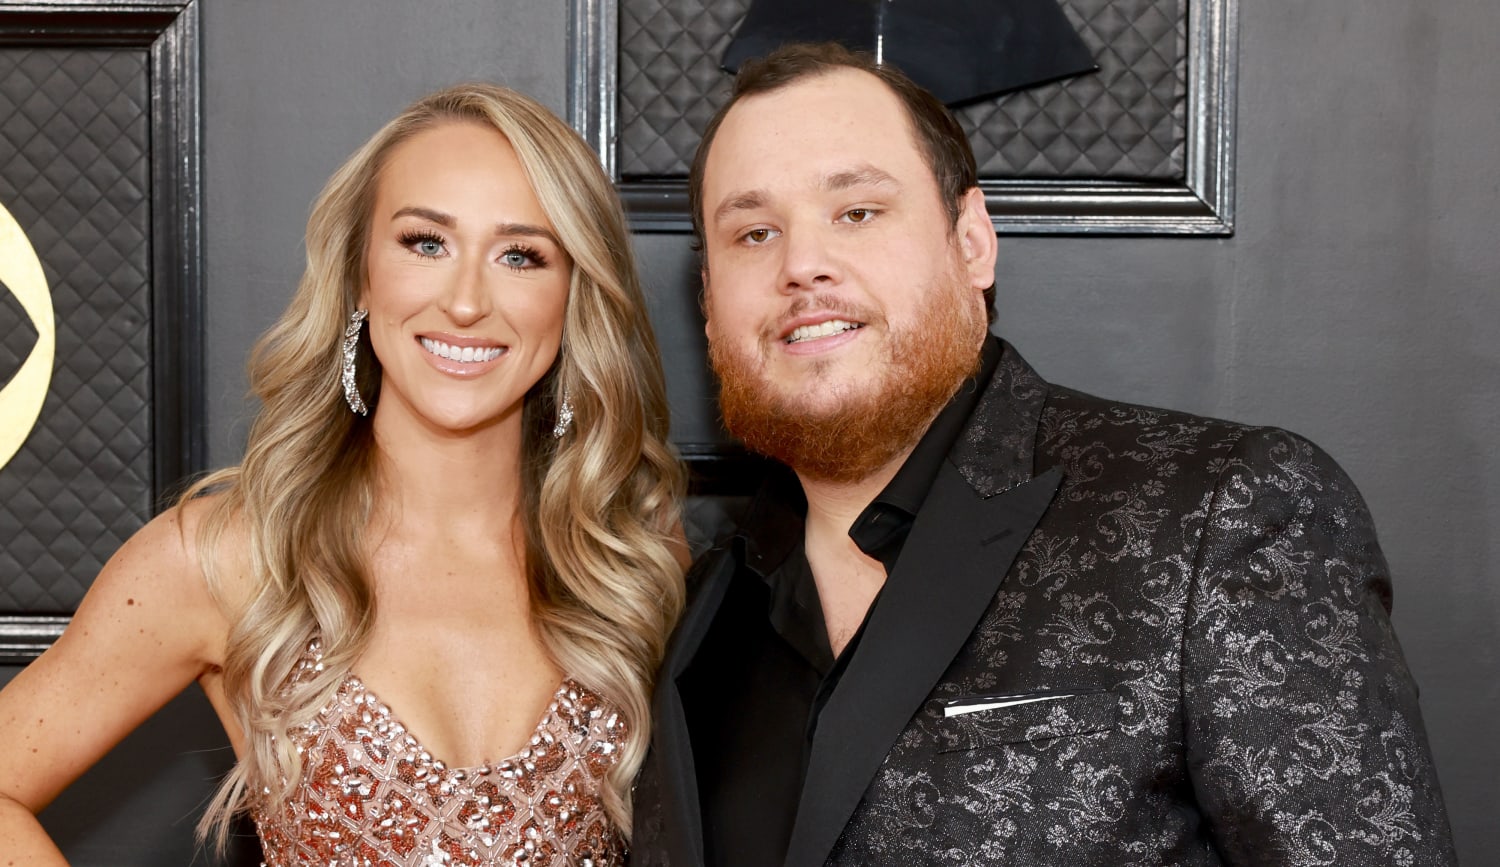 https://media-cldnry.s-nbcnews.com/image/upload/rockcms/2023-03/luke-combs-nicole-combs-wife-baby-2-today-main-230320-a912e5.jpg